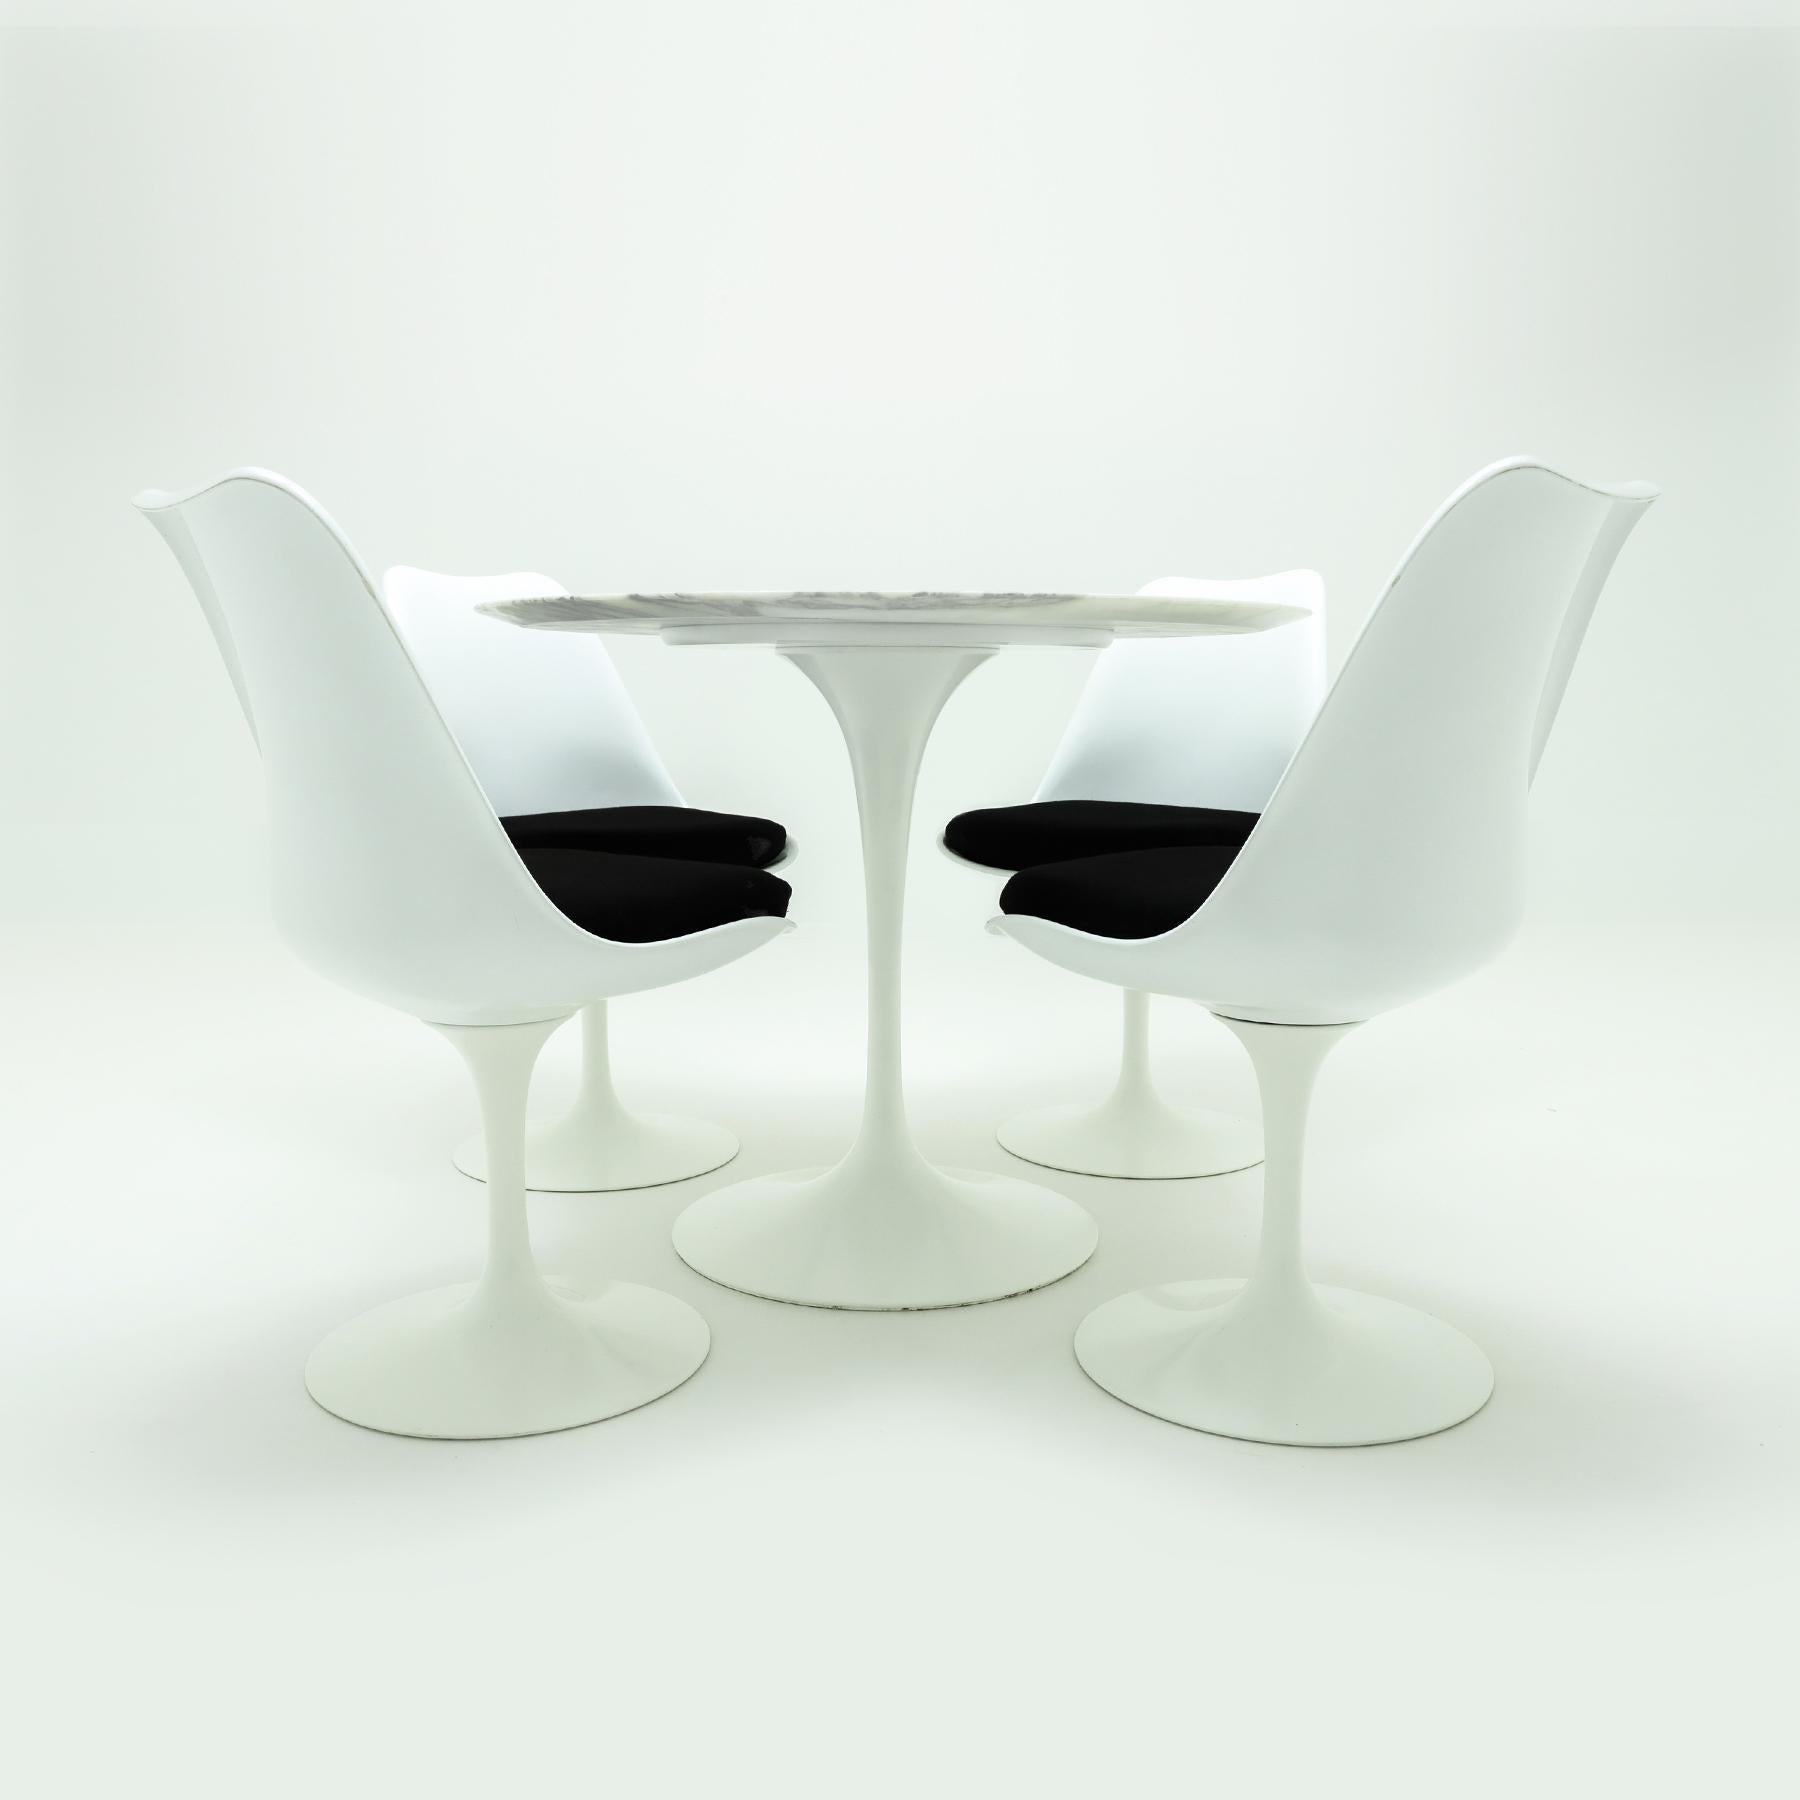 An iconic vintage Eero Saarinen, Knoll white tulip dining set with a Calacatta marble top and 4 matching Saarinen, Knoll vintage tulip chairs with the original seat pads and covers. 

This is a classic and iconic combination that has its root in